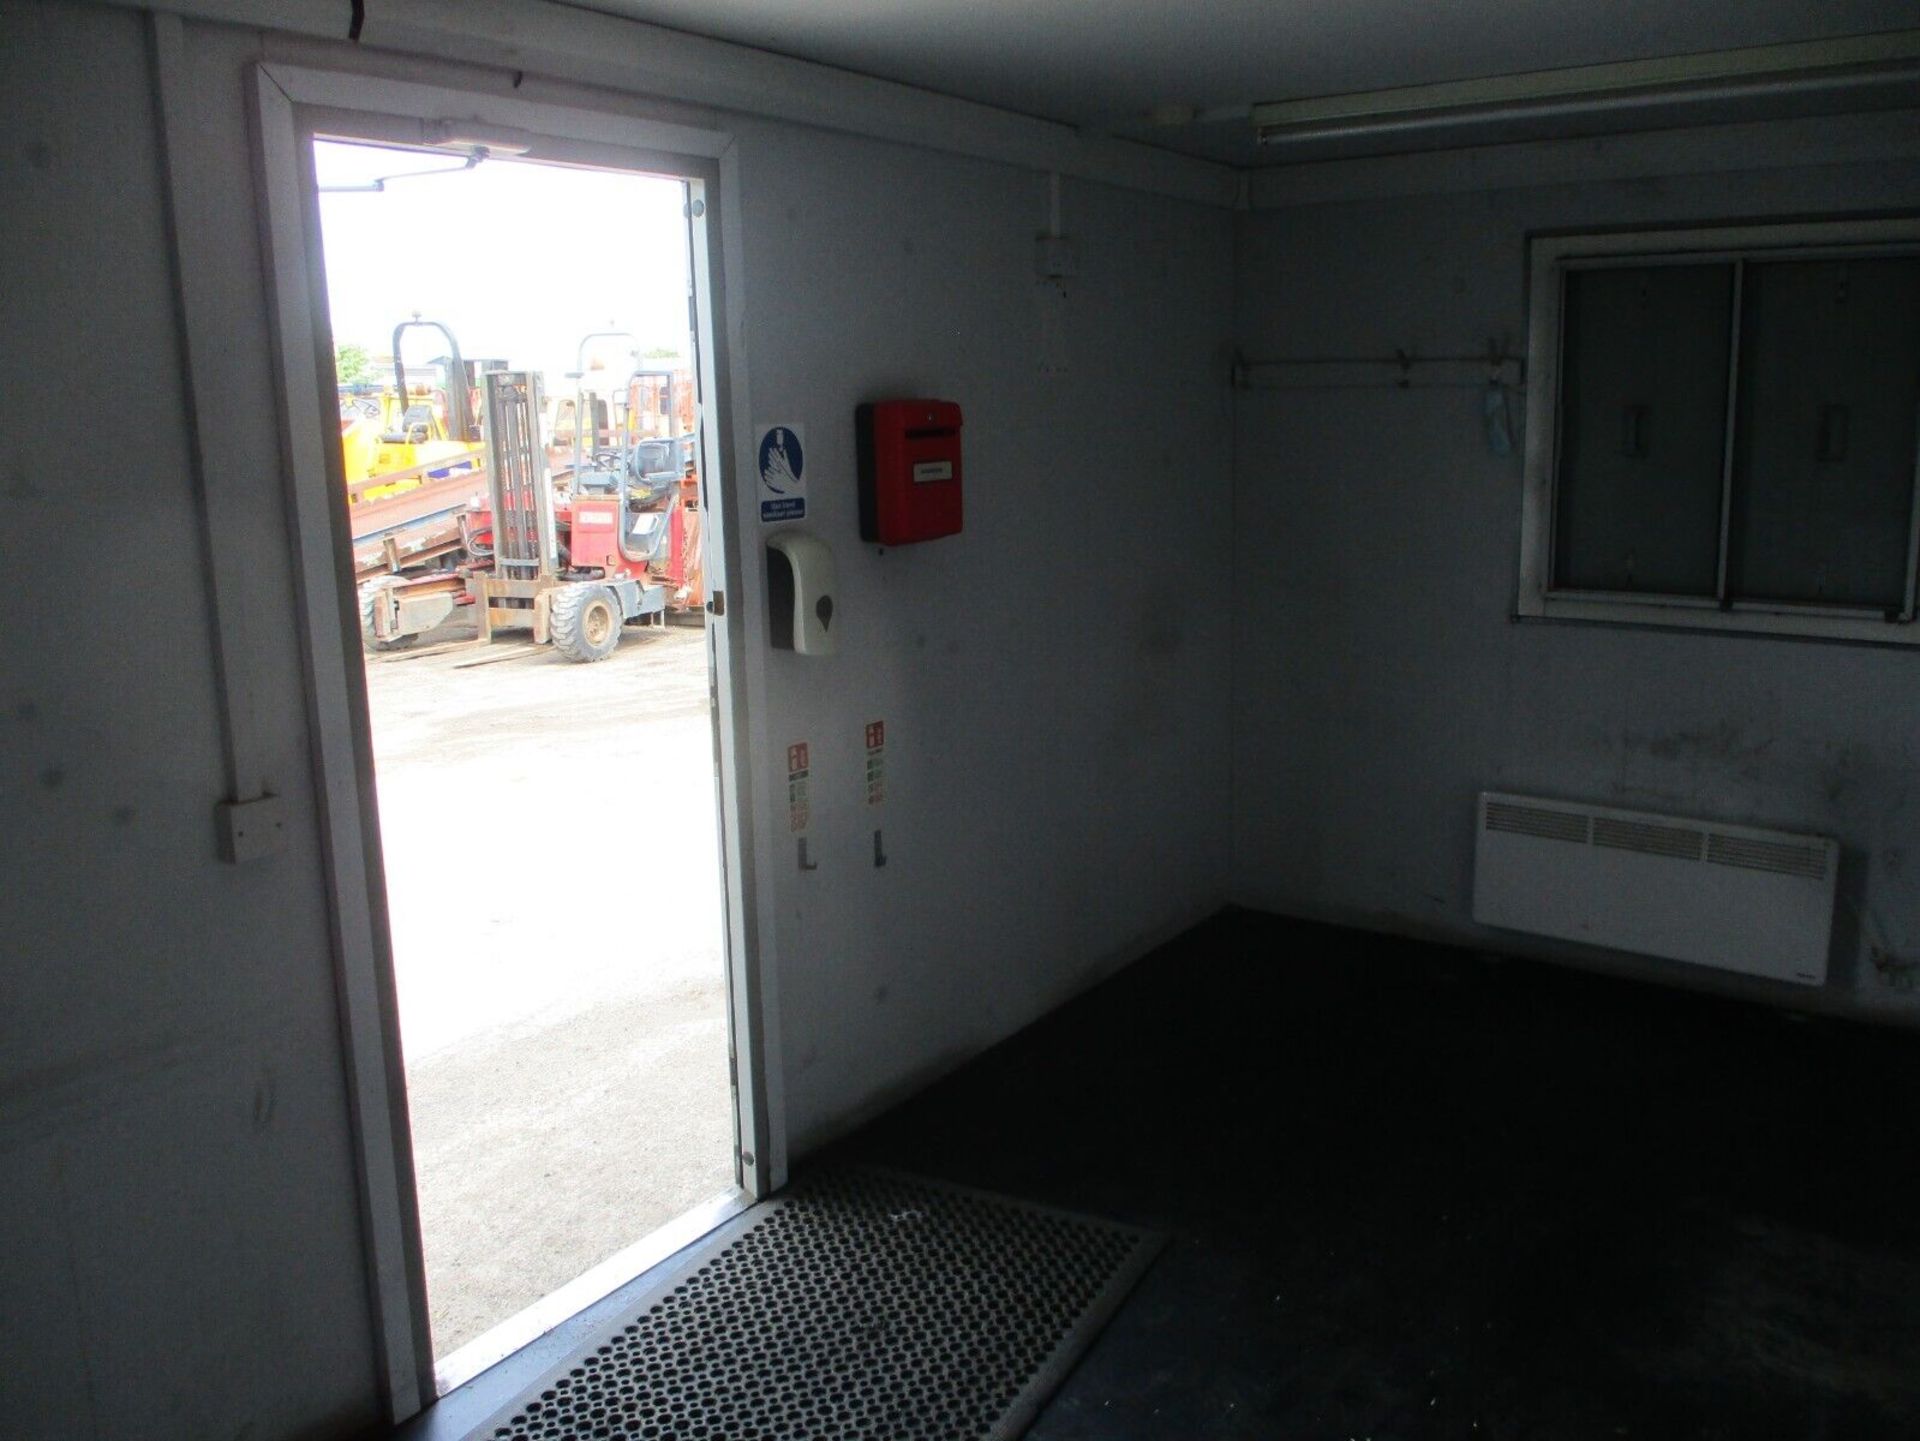 20 X 9 FT FEET FOOT SECURE SHIPPING CONTAINER CANTEEN OFFICE KITCHEN - Image 4 of 7